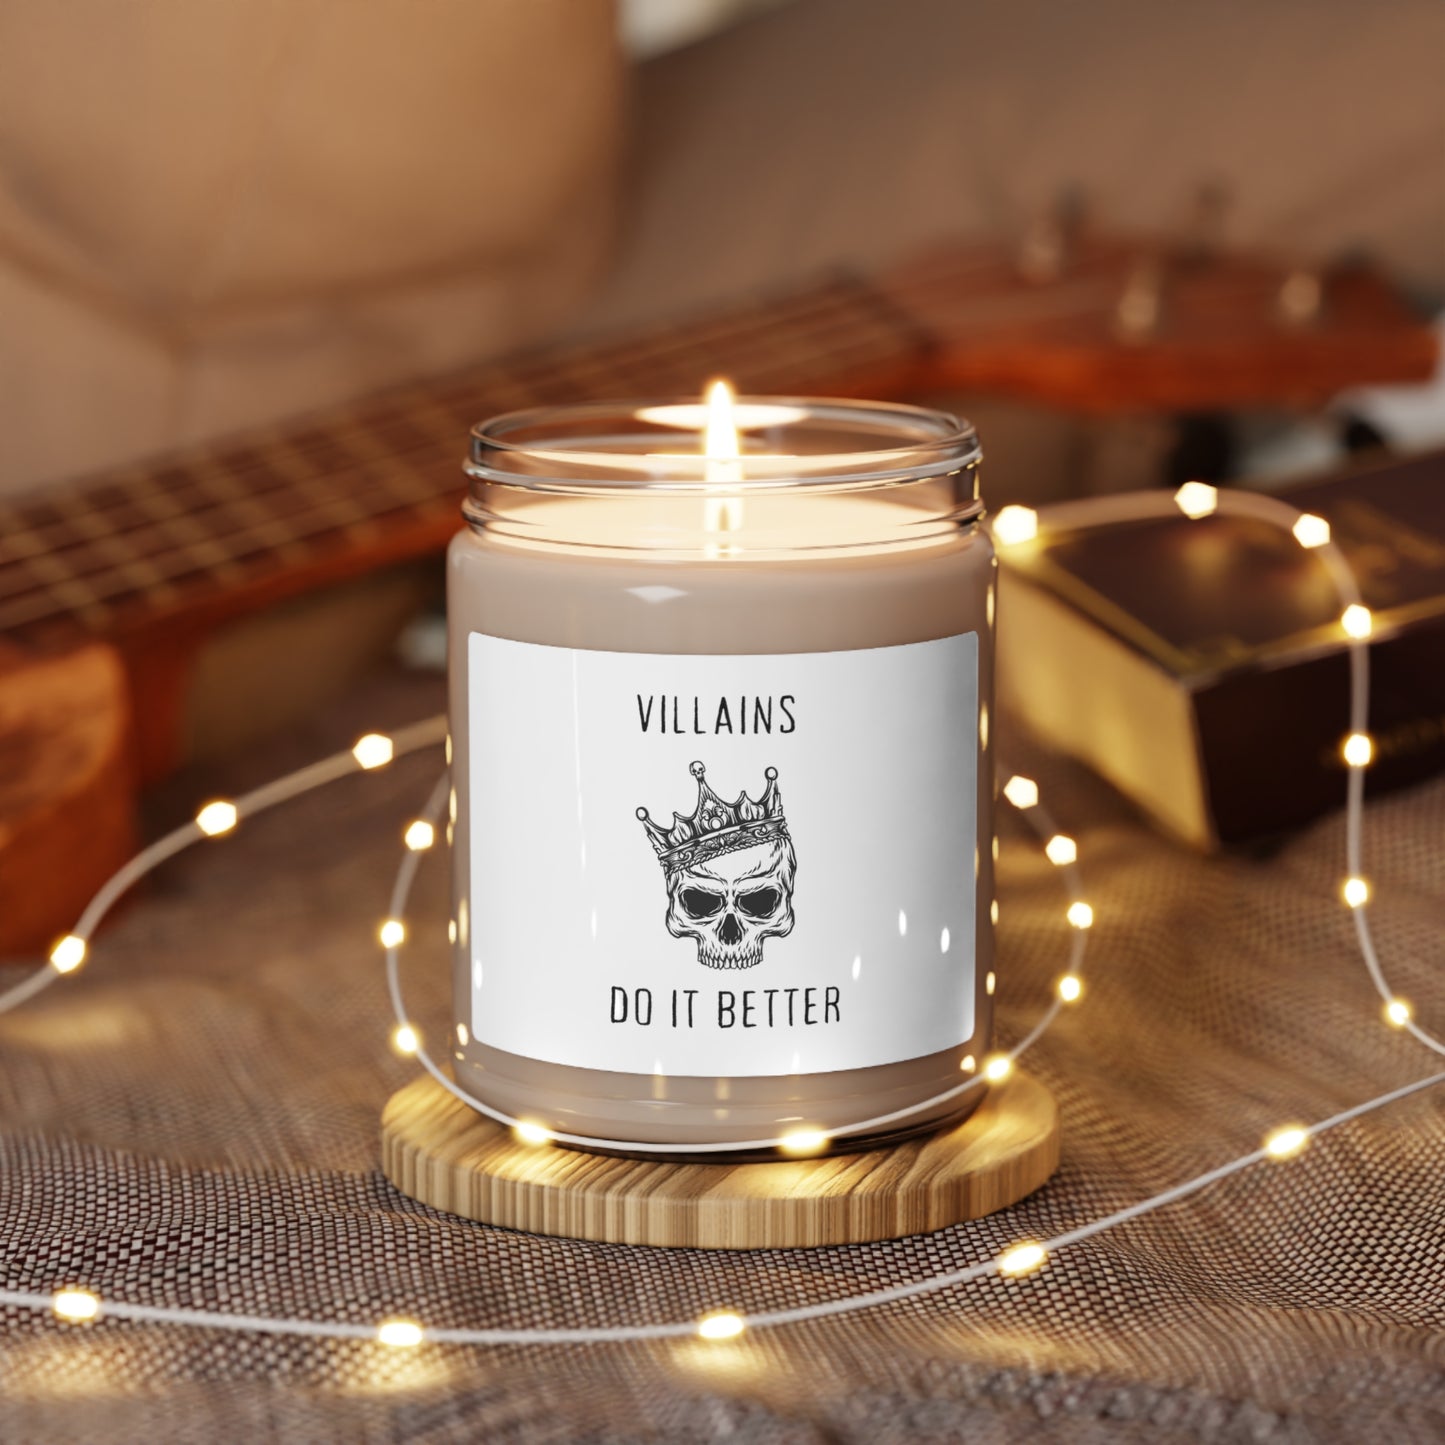 Villians Do It Better Scented Soy Candle, 9oz